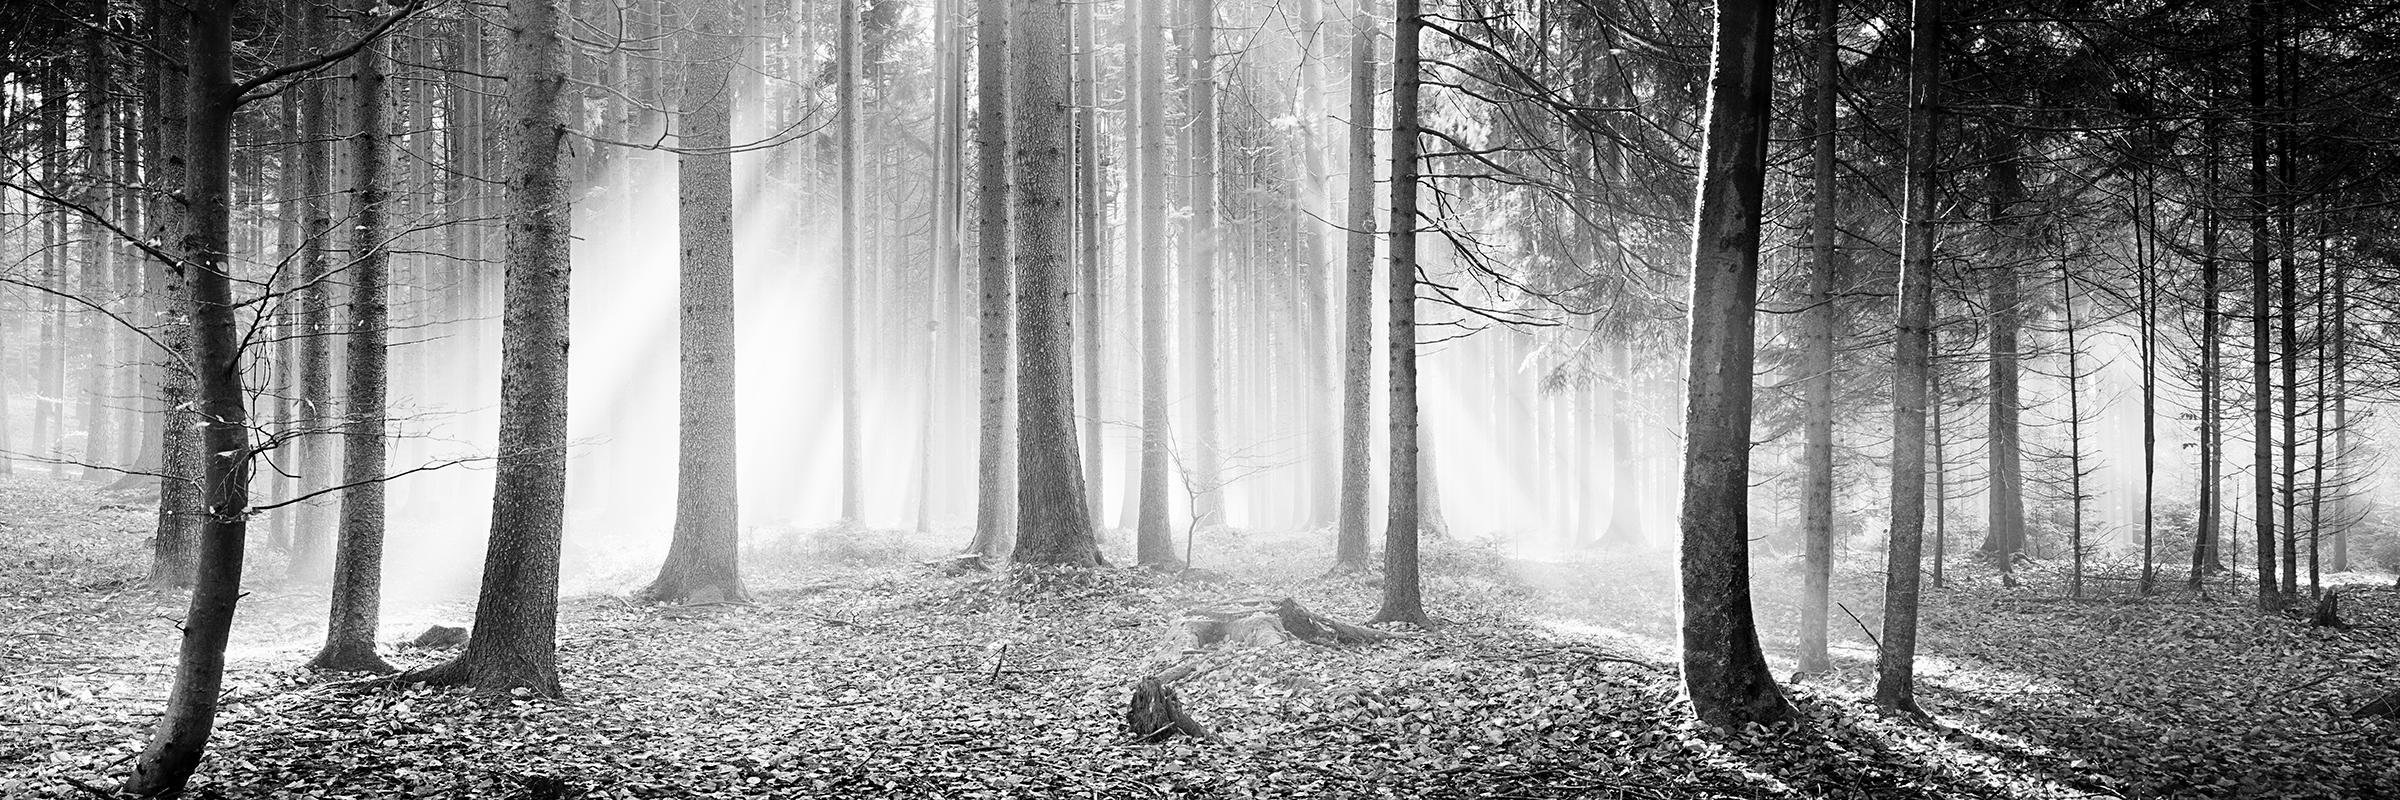 Gerald Berghammer Black and White Photograph - Enchanted Forest Trees foggy sunny black white panorama landscape photography